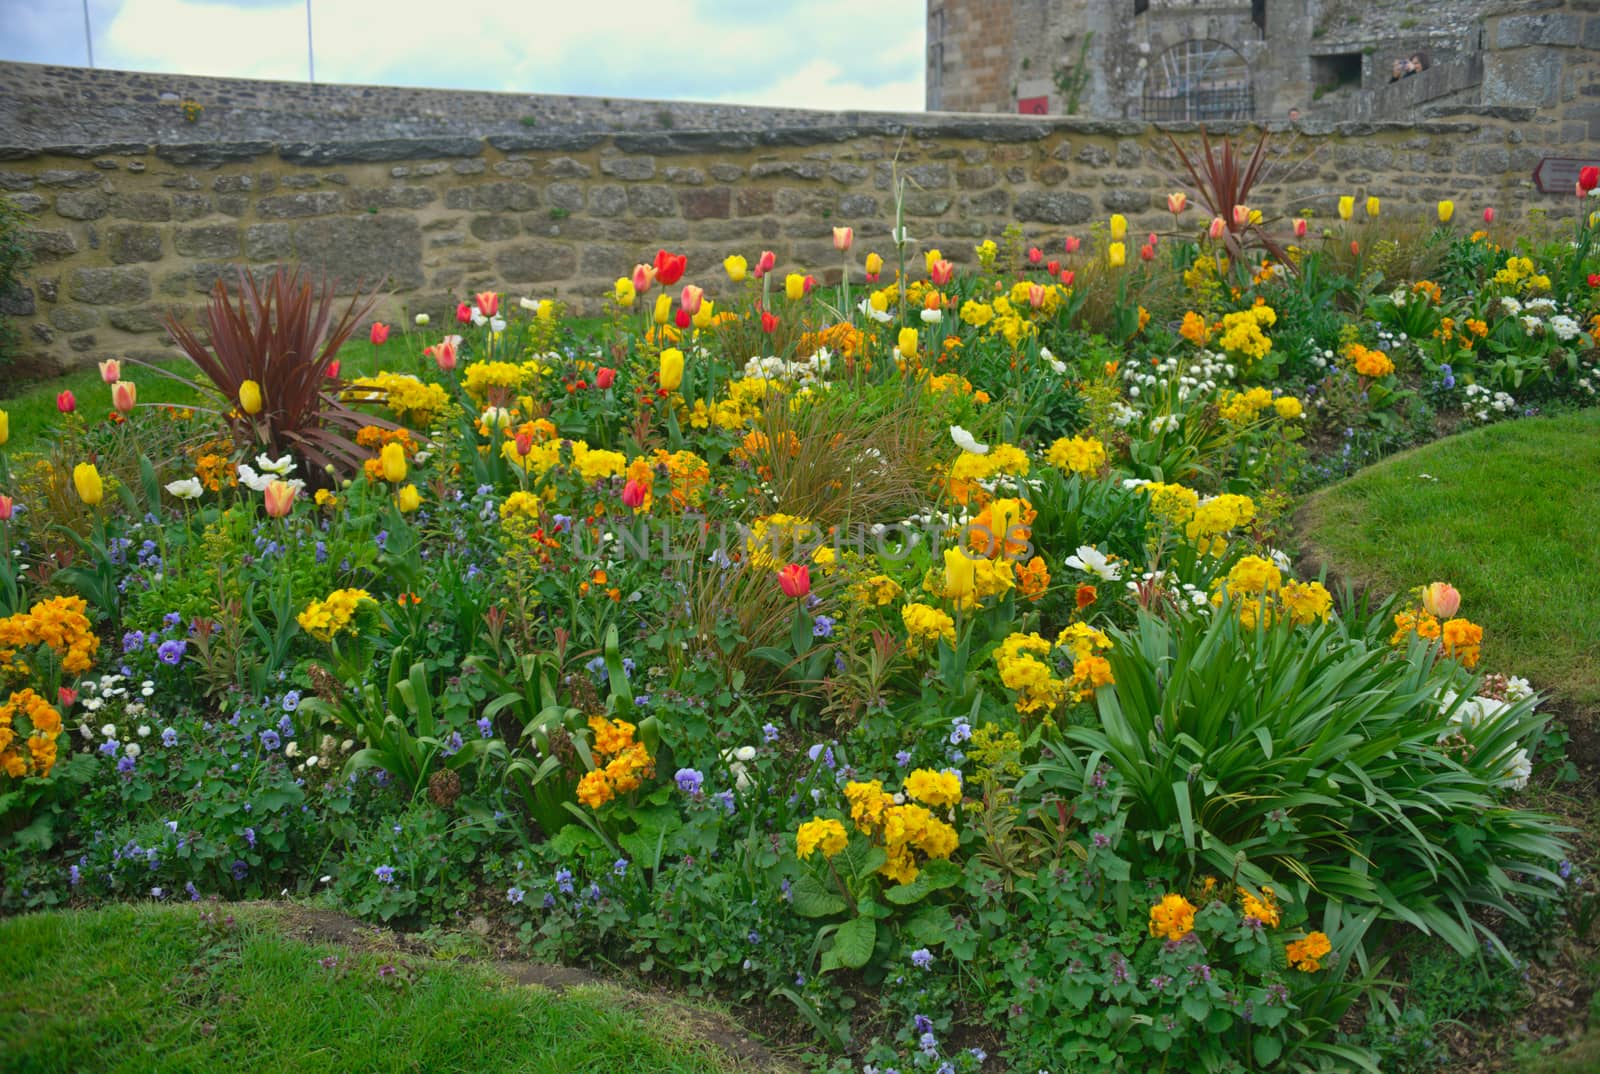 Various different blooming plants on lawn and stone wall behind by sheriffkule